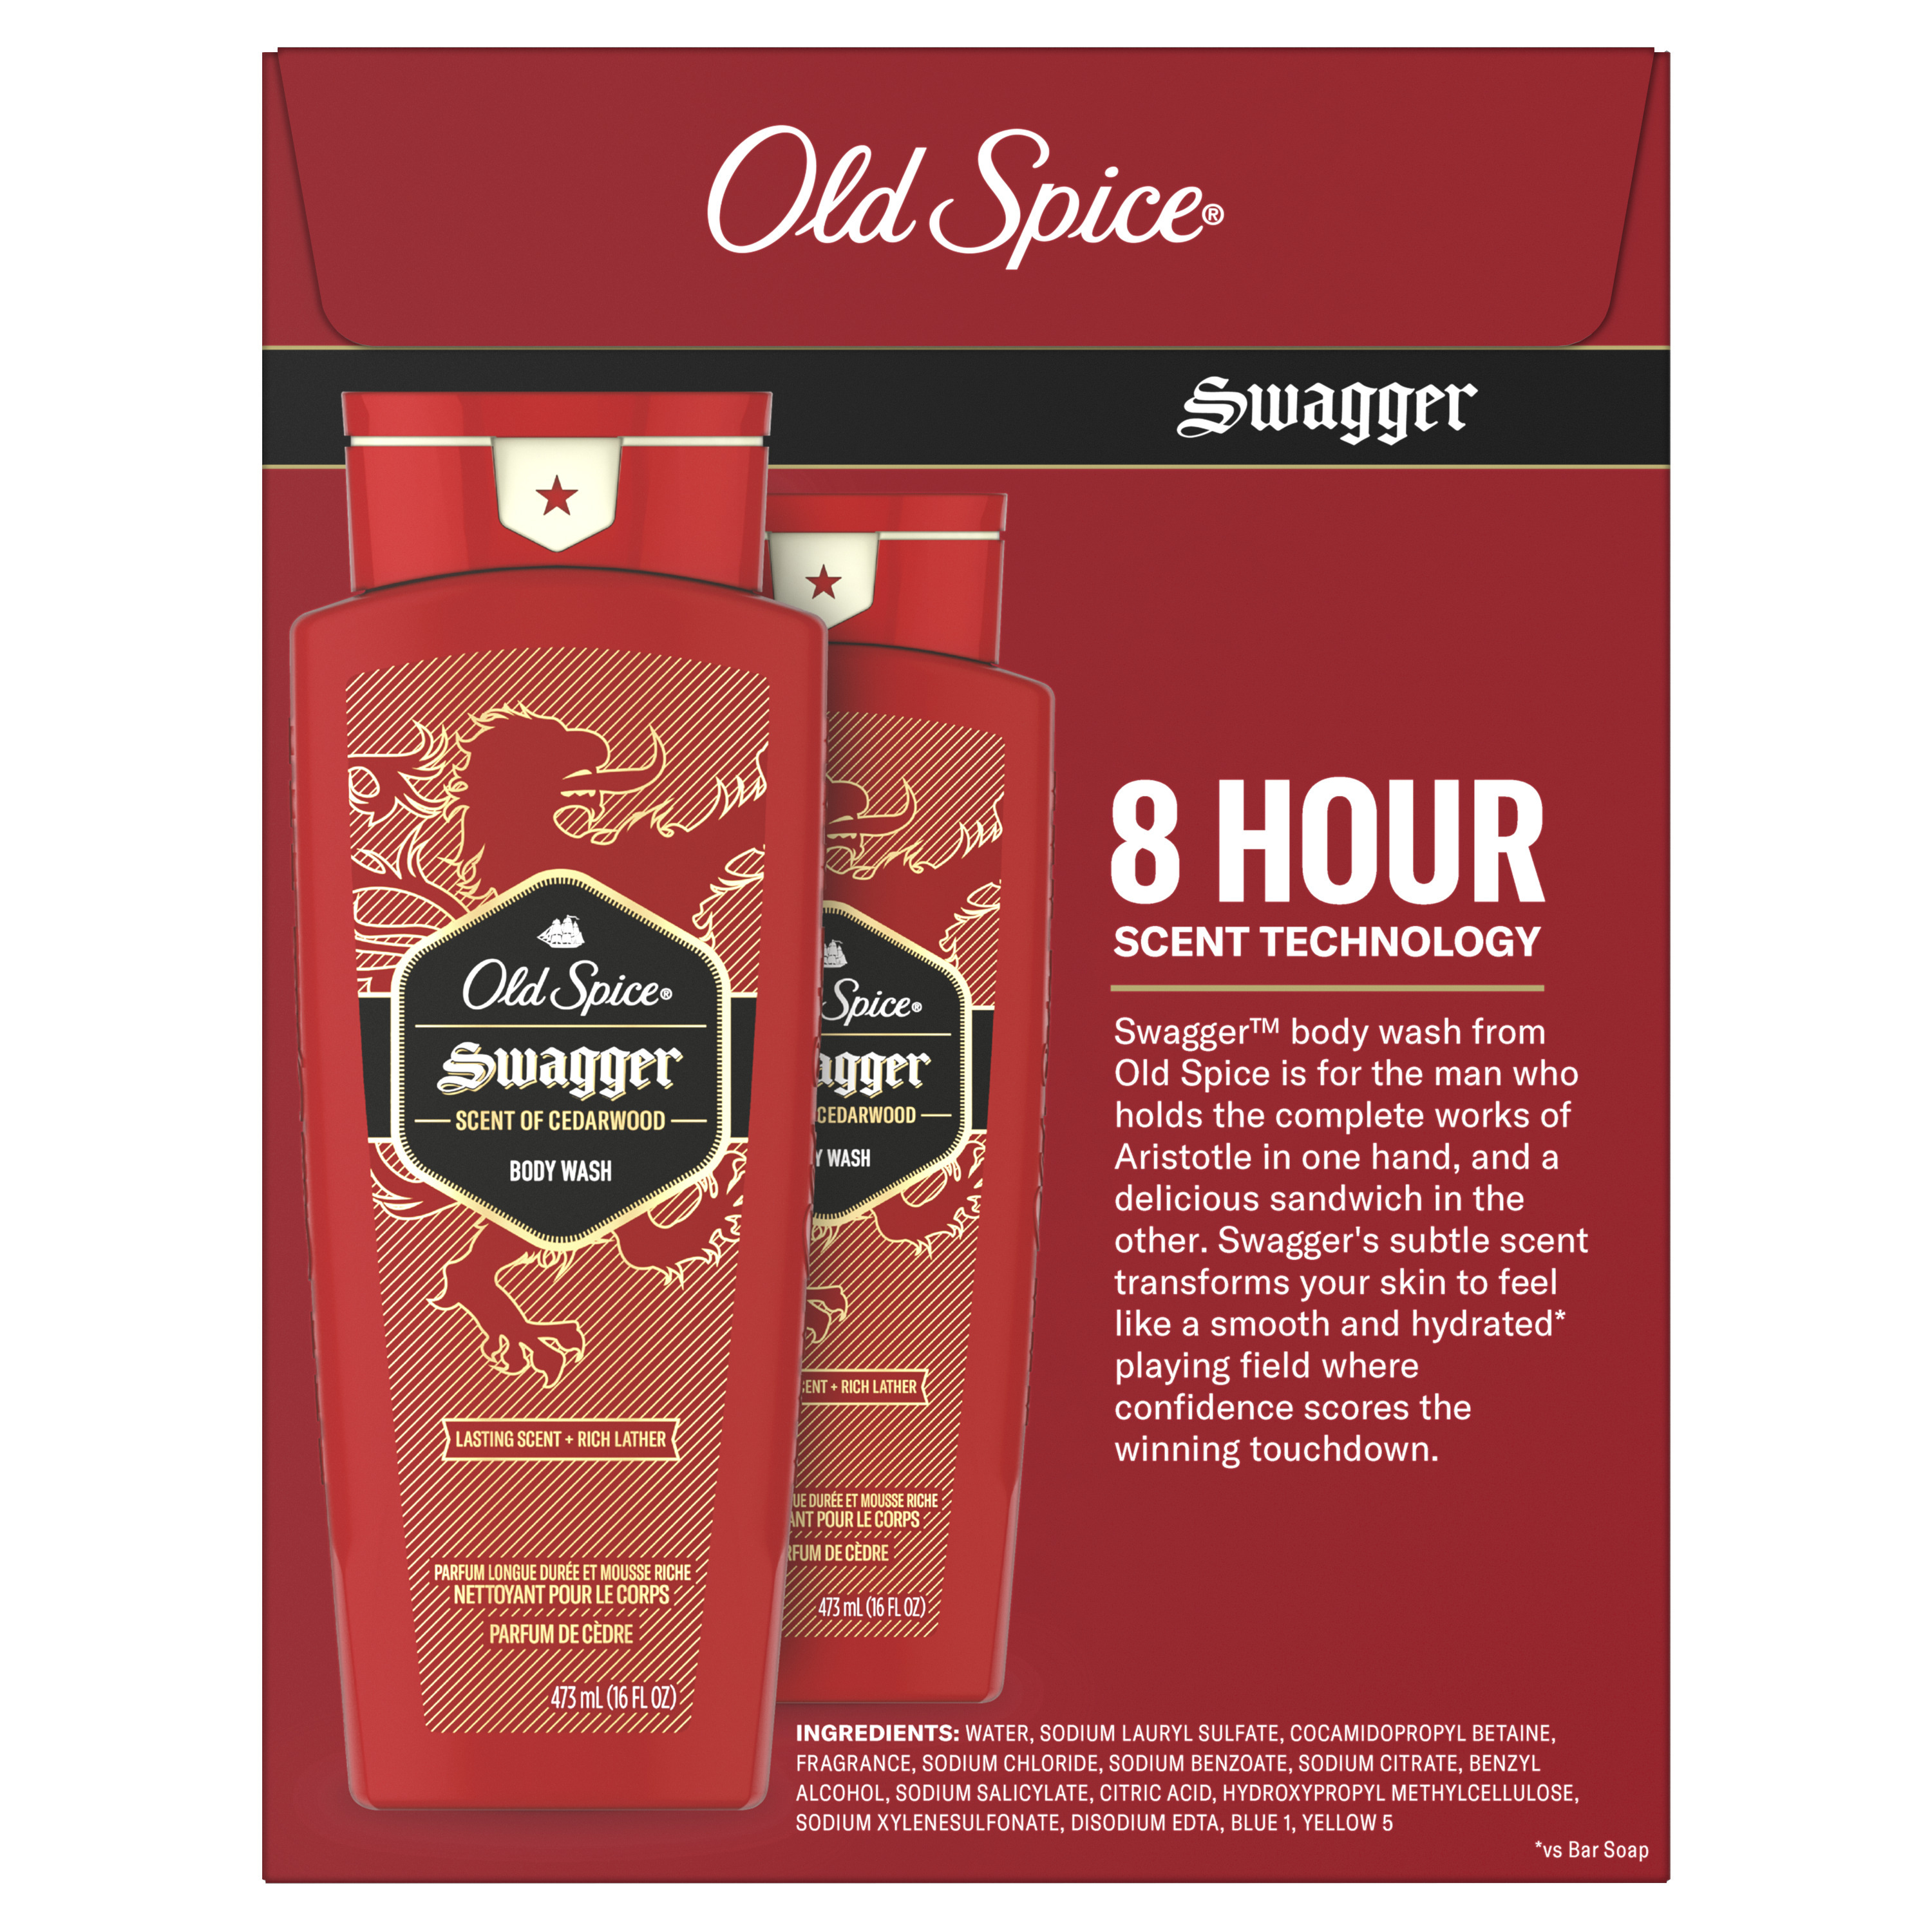 Old Spice Swagger Body Wash, 16 fl oz each, Pack of 2 - image 2 of 10